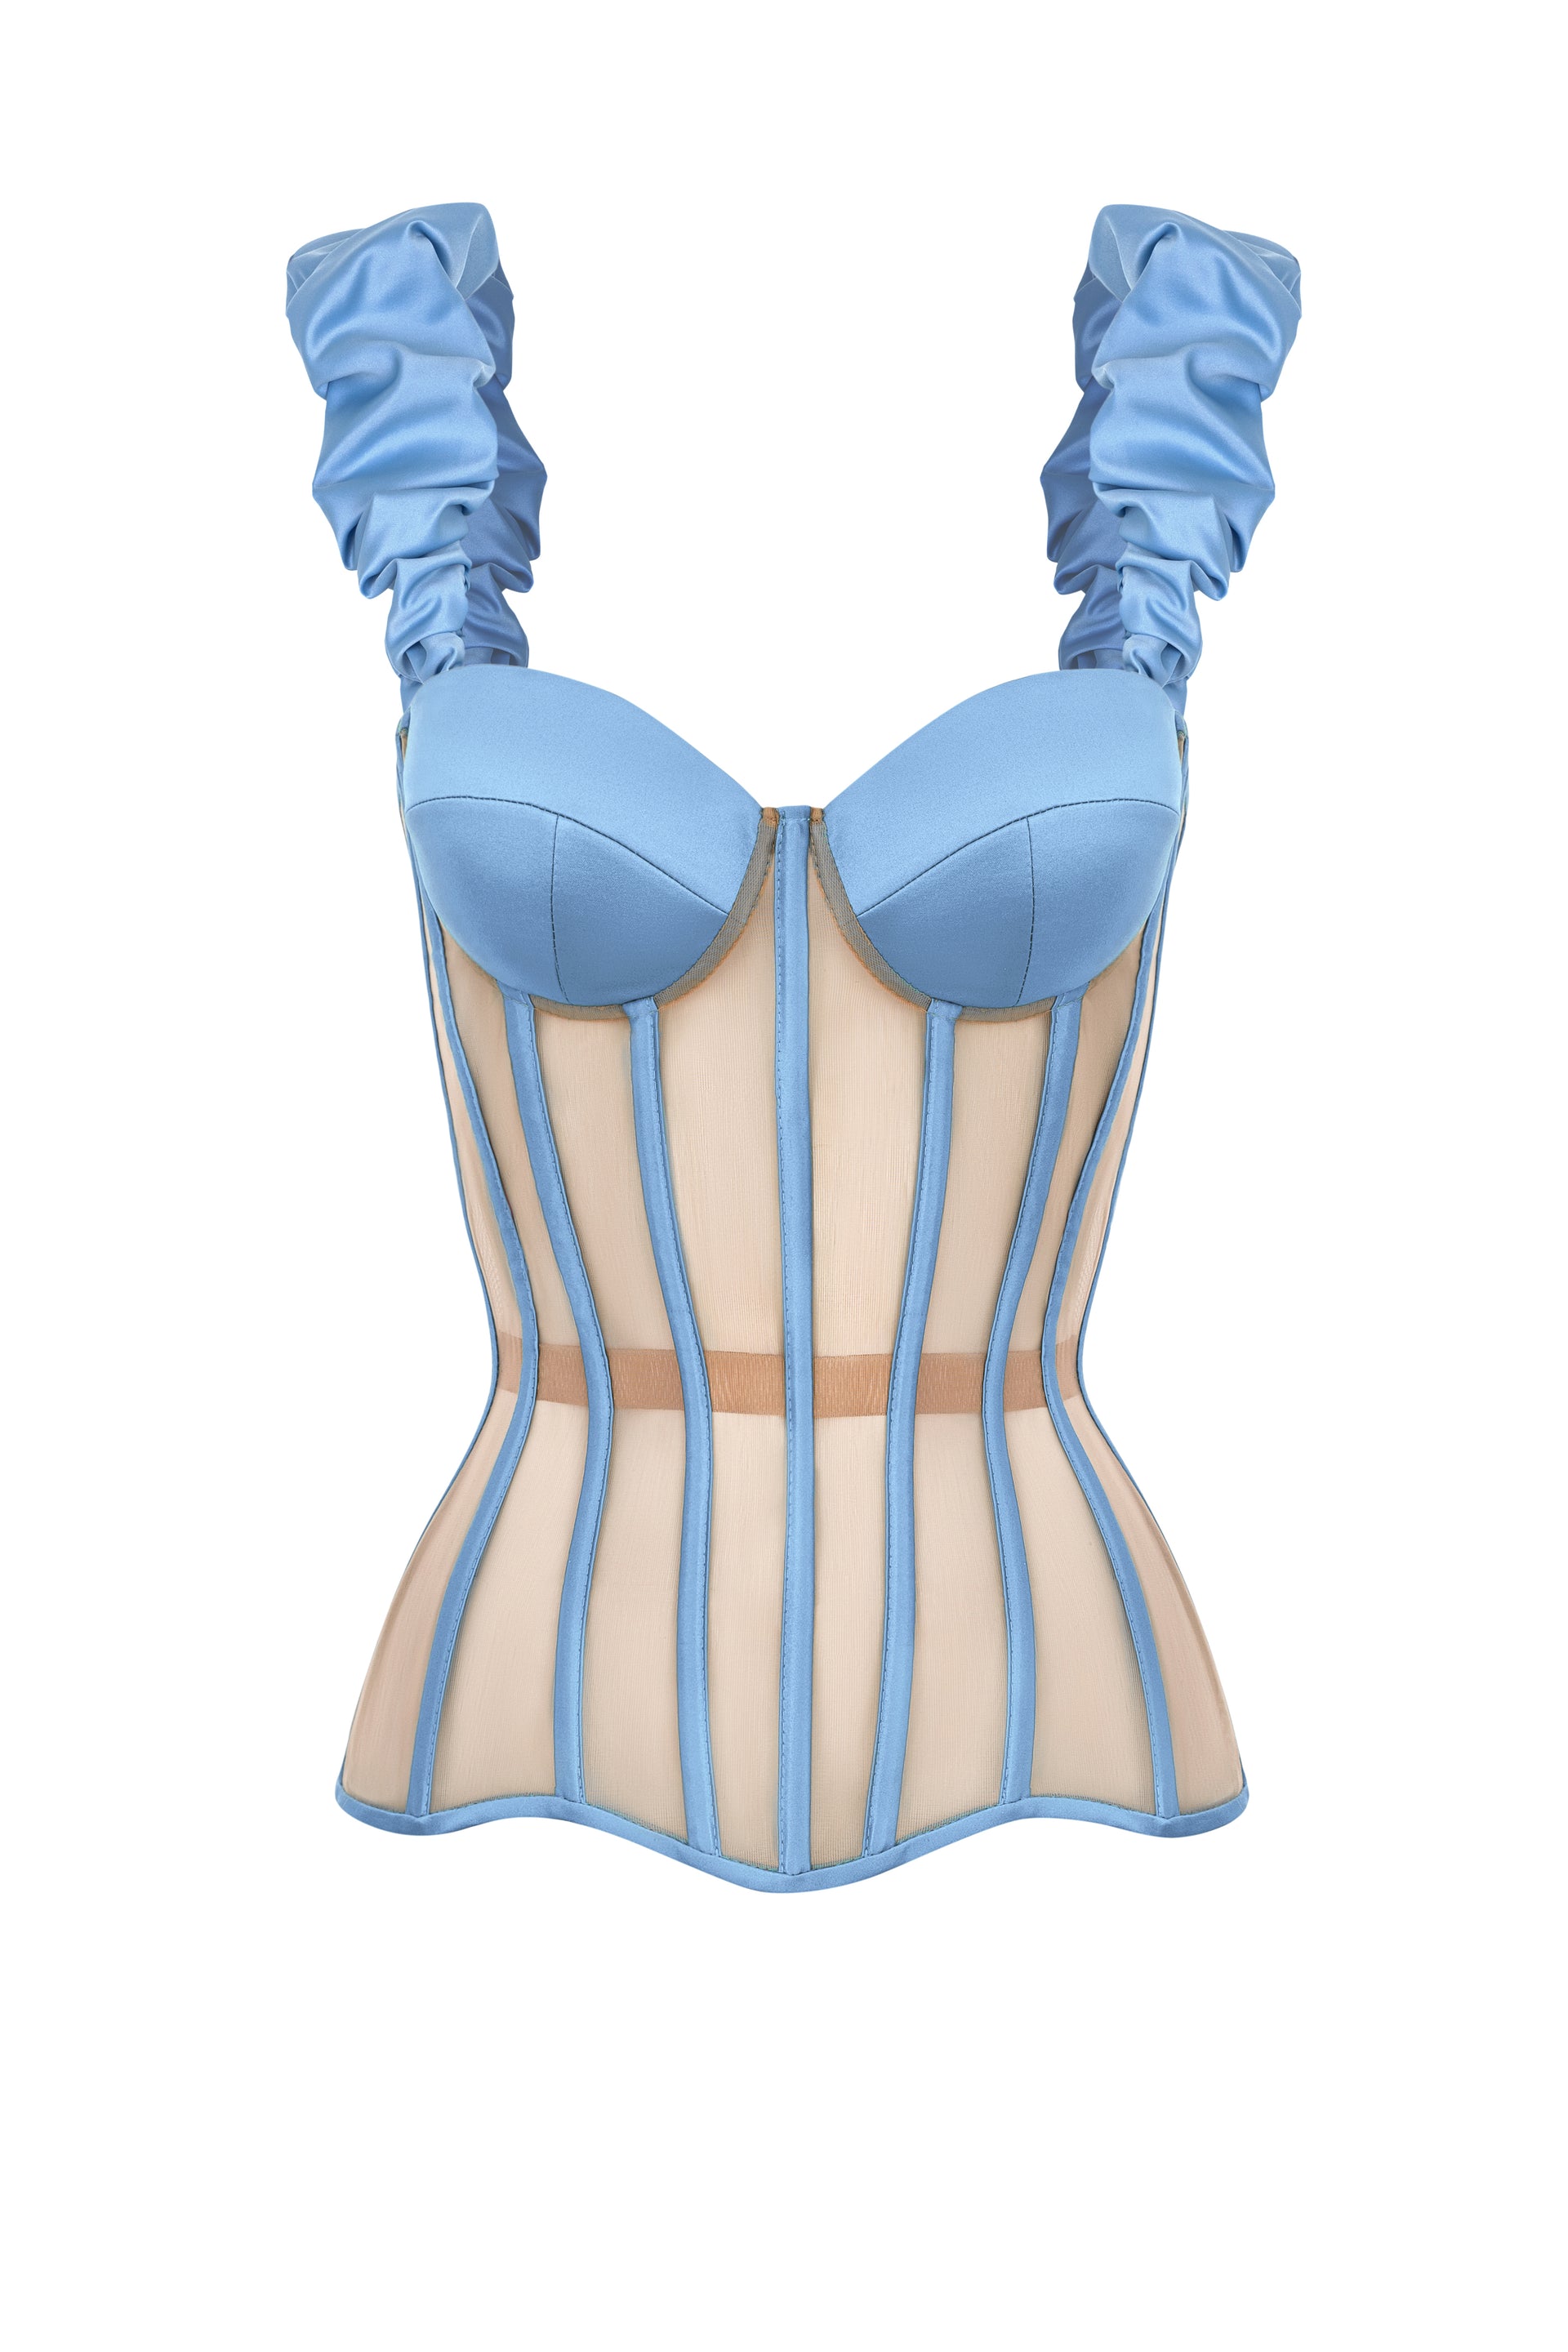 Jeans blue corset with reliefs and detachable straps